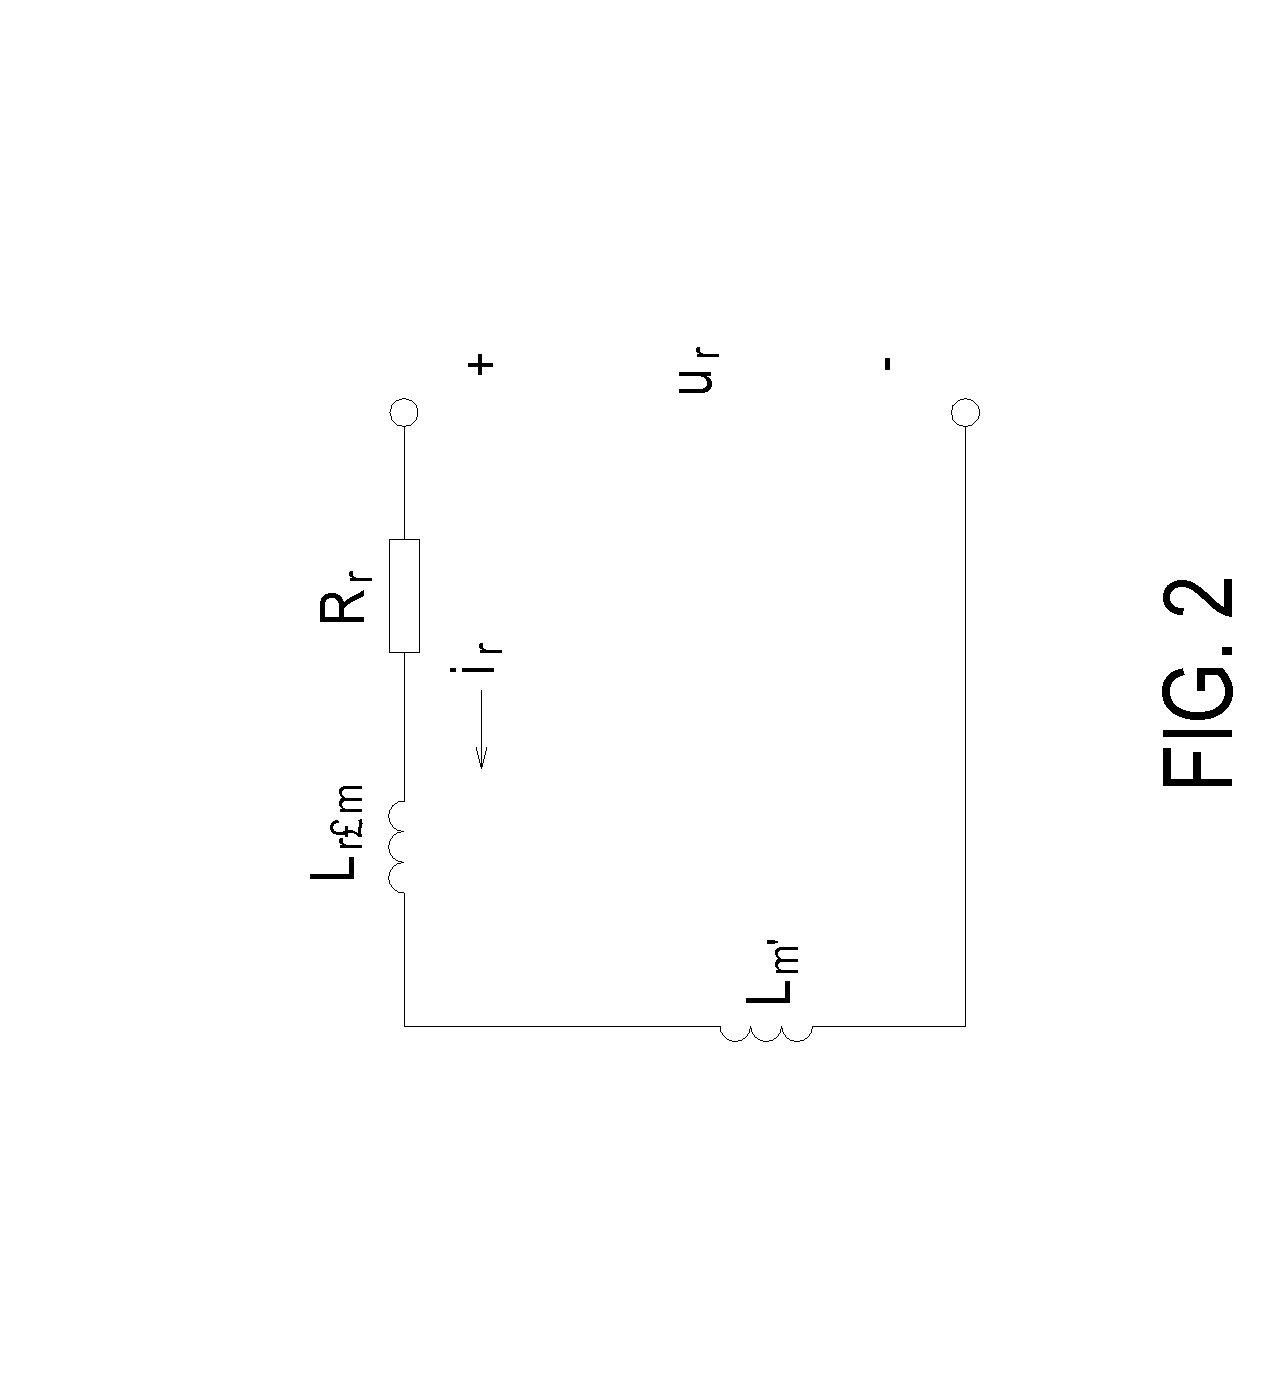 Doubly-fed induction generator system and the self-test method for the active crowbar circuit thereof